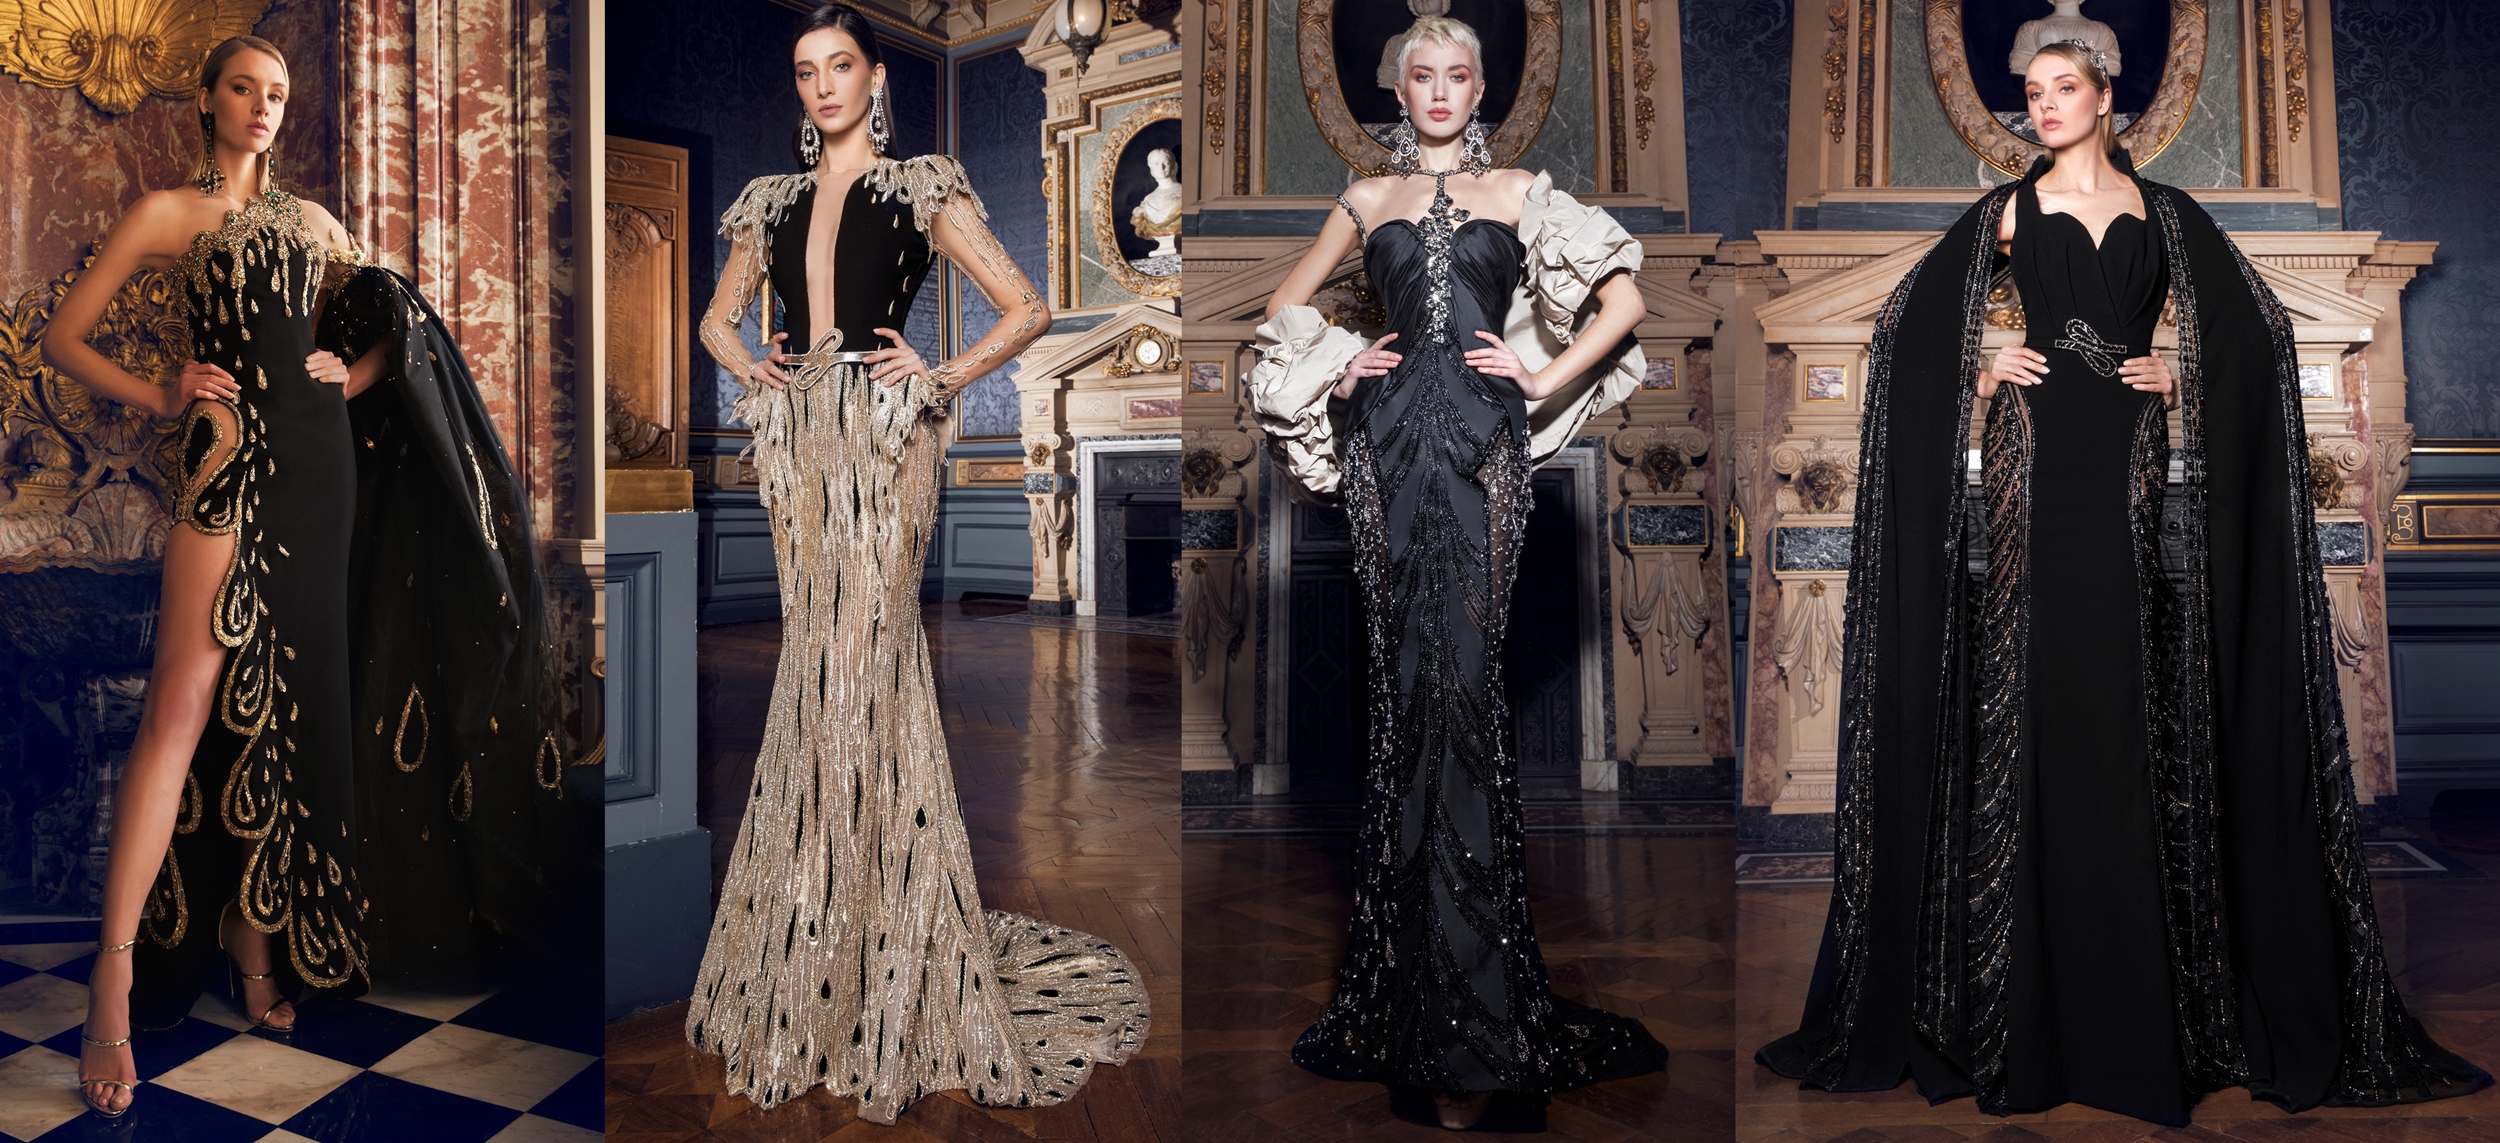 Paris Haute Couture Fashion Week: Ziad Nakad SS2022 Collection